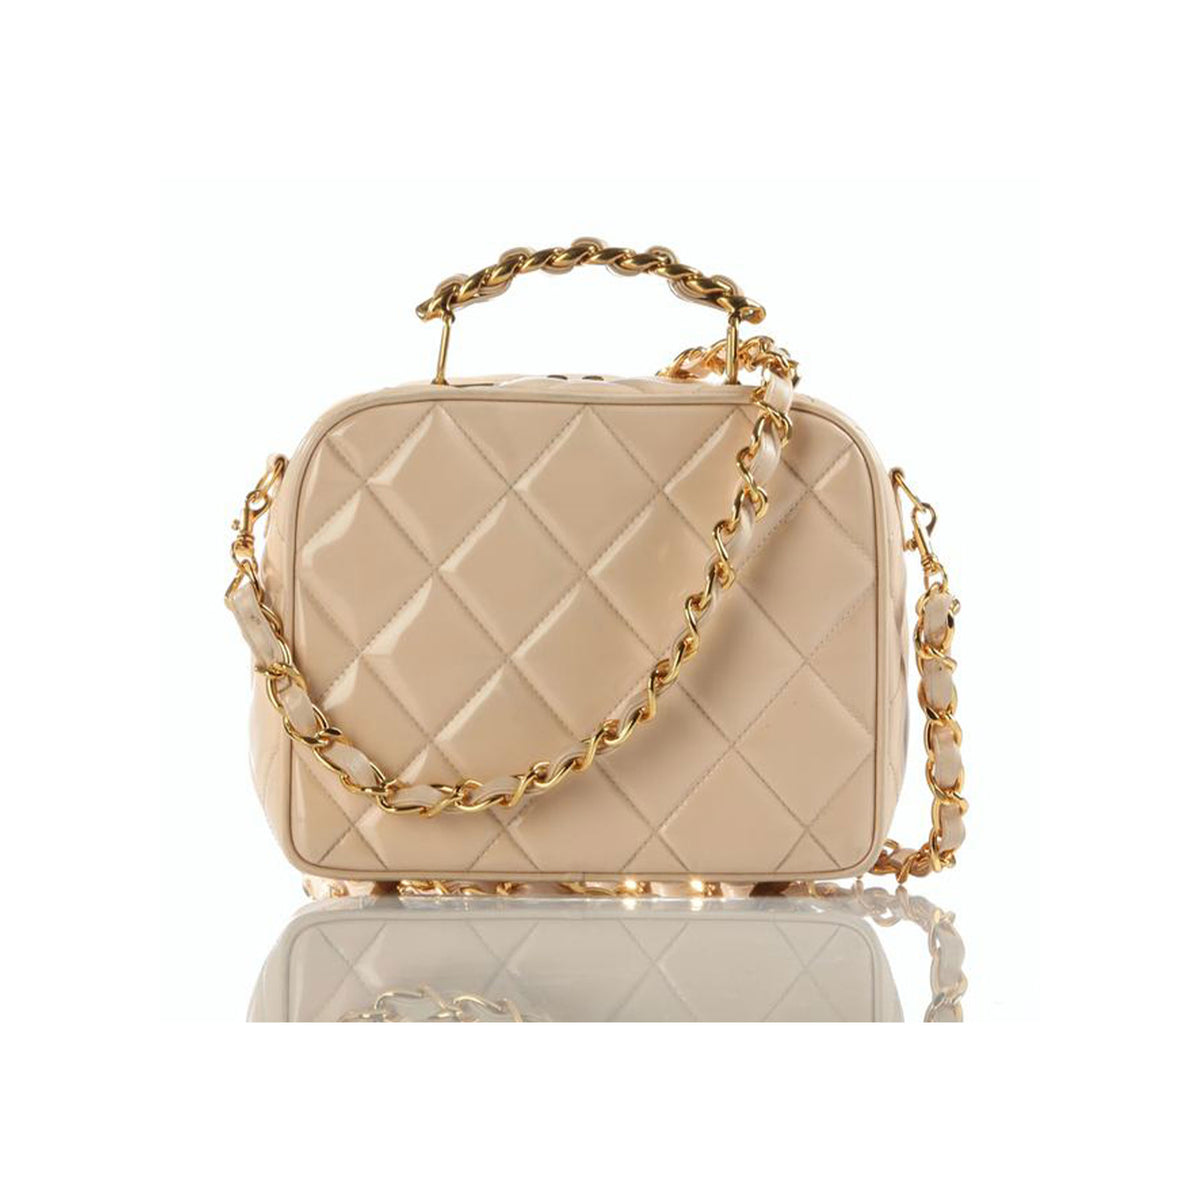 CHANEL Camera Bag in Camel Quilted Leather